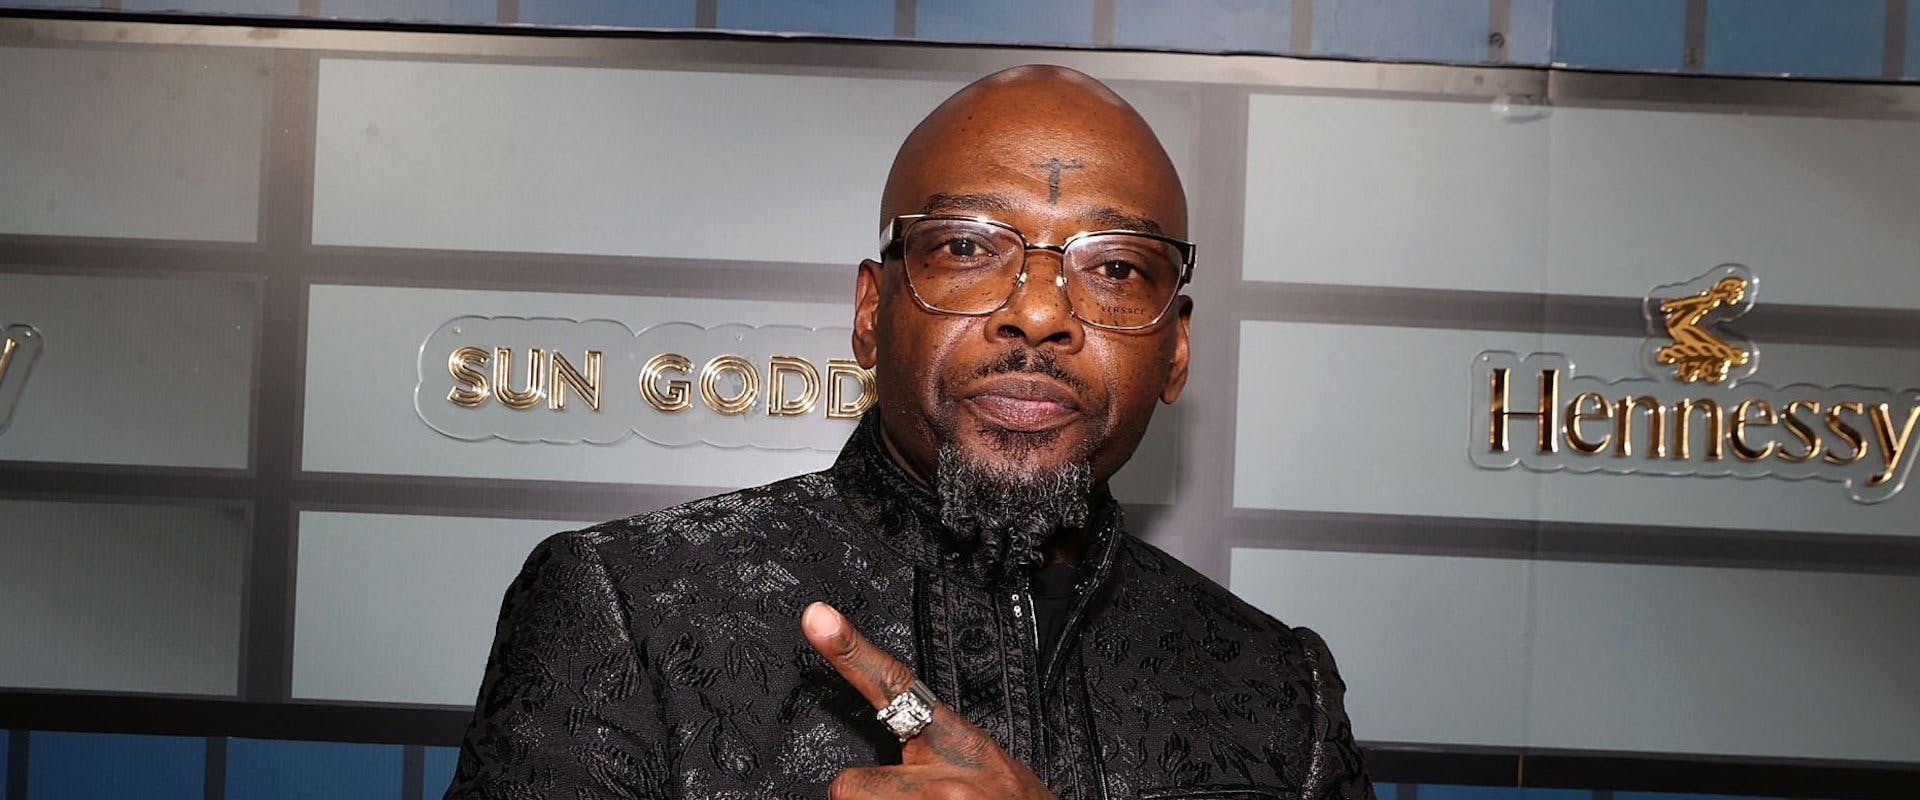 Treach attends Brooklyn Chophouse Grand Opening at Brooklyn Chophouse on April 25, 2022 in New York City. (Photo by Shareif Ziyadat/Getty Images)